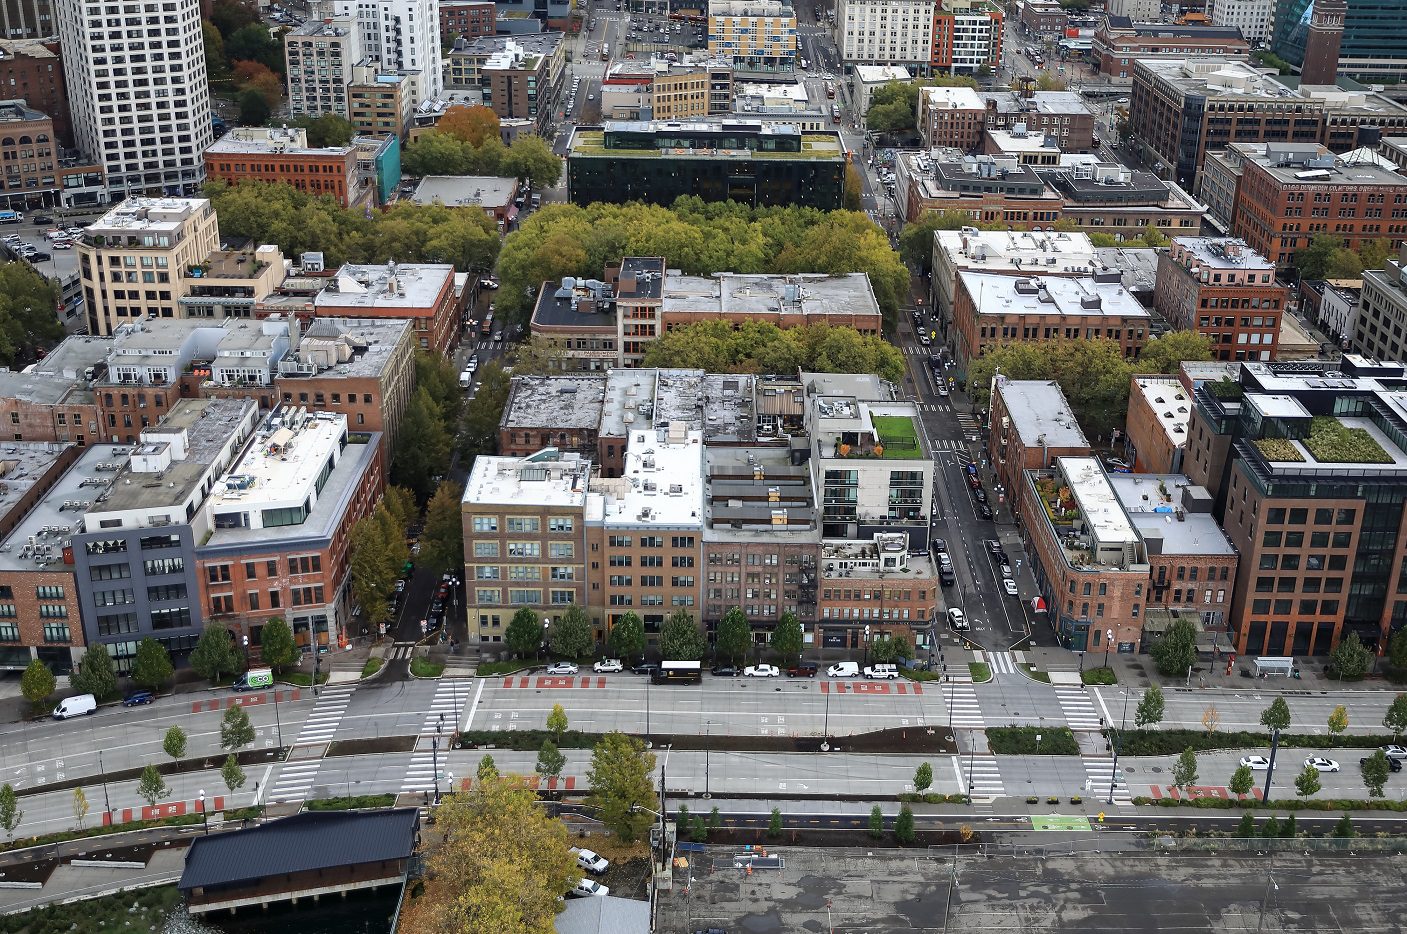 An aerial view of a cityscape with large buildings and street areas along with trees and vegetation.